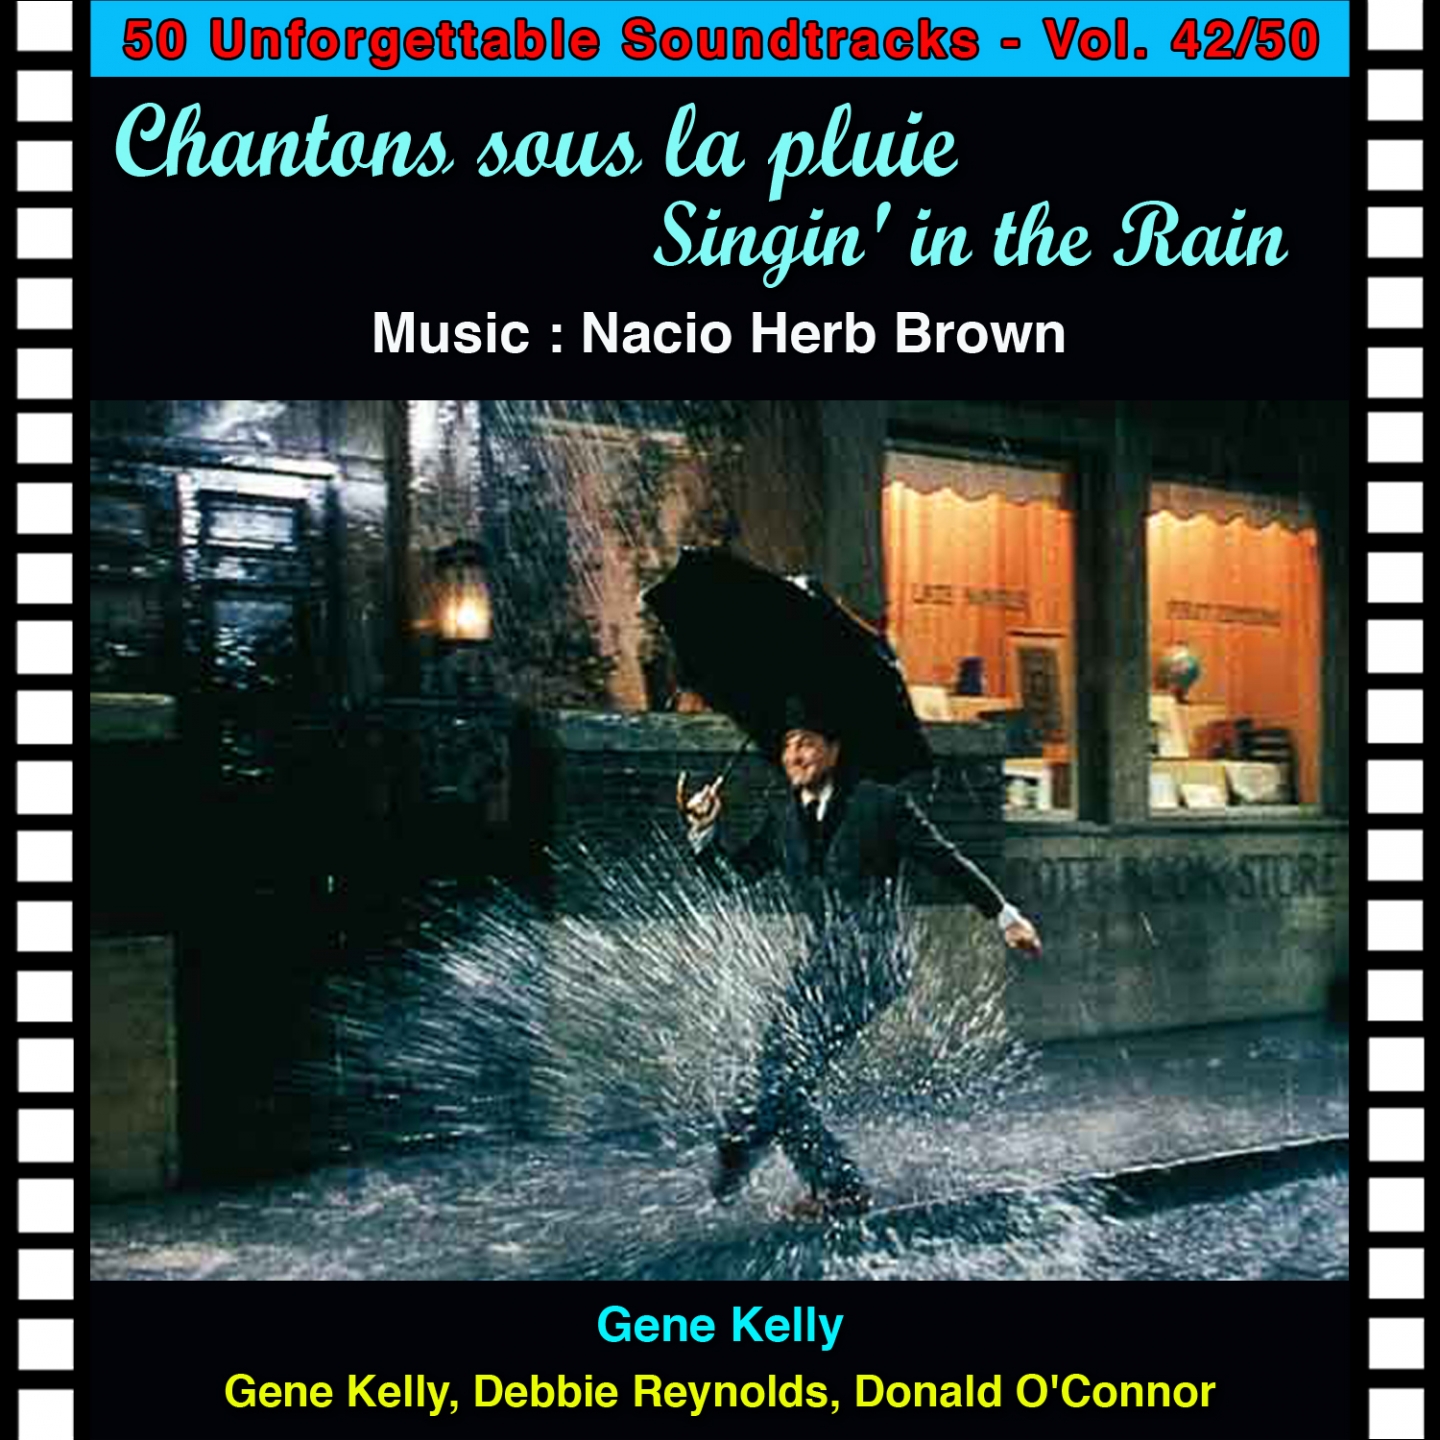 Reprise: All I Do Is Dream of You (Chantons Sous La Pluie - Singing' in the Rai)